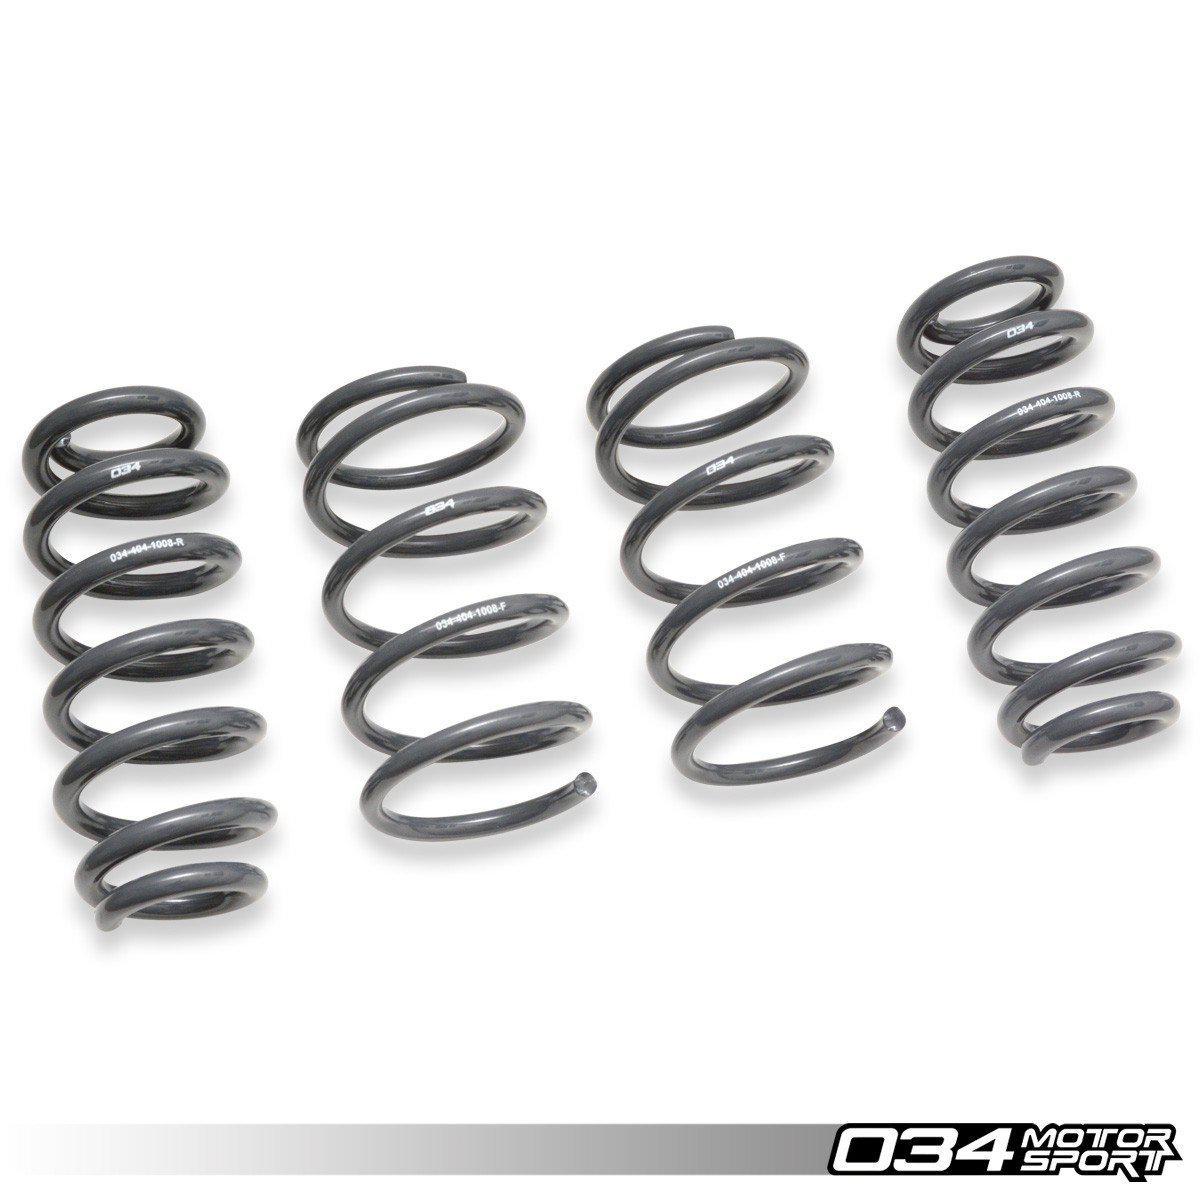 Dynamic+ Lowering Springs, 8V.5 Audi RS3 Quattro Performance Spring Set-A Little Tuning Co